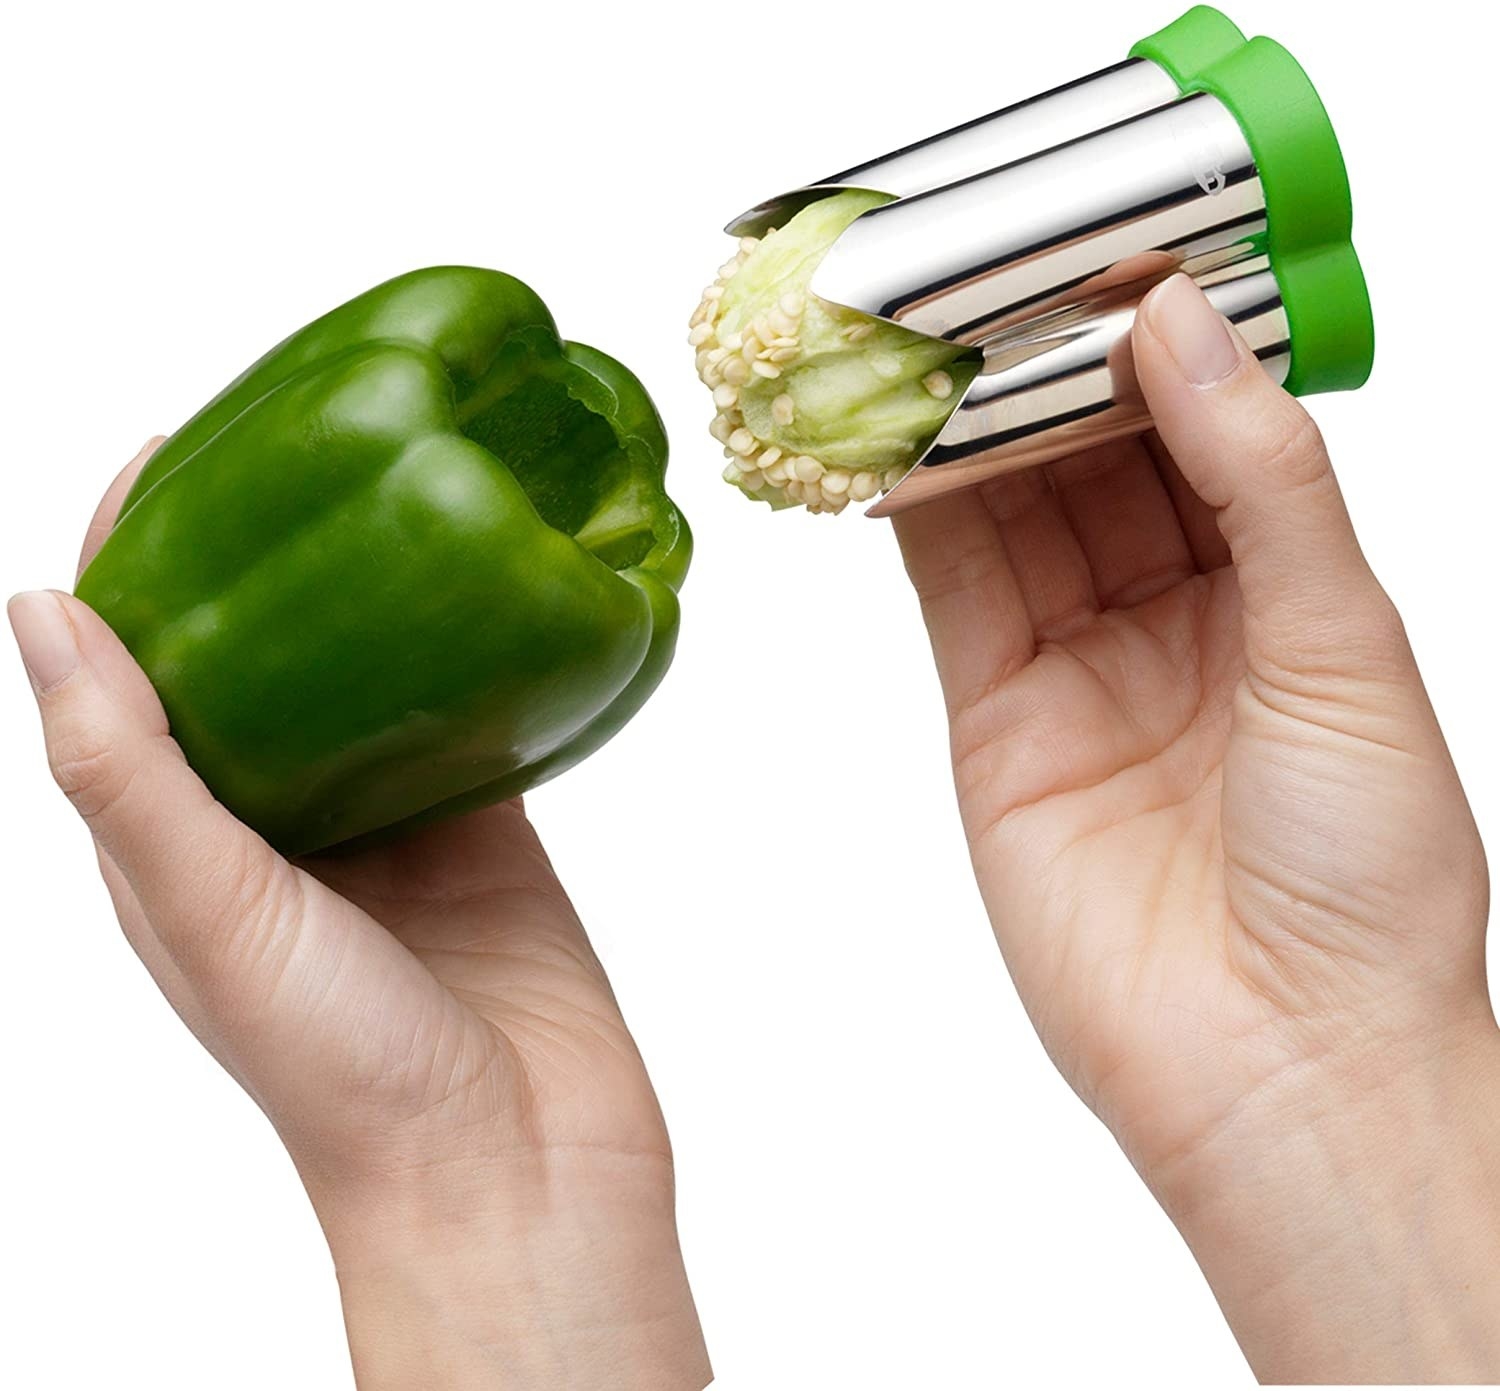 Hands holding the stainless steel corer with stem and seeds inside, and a cored pepper